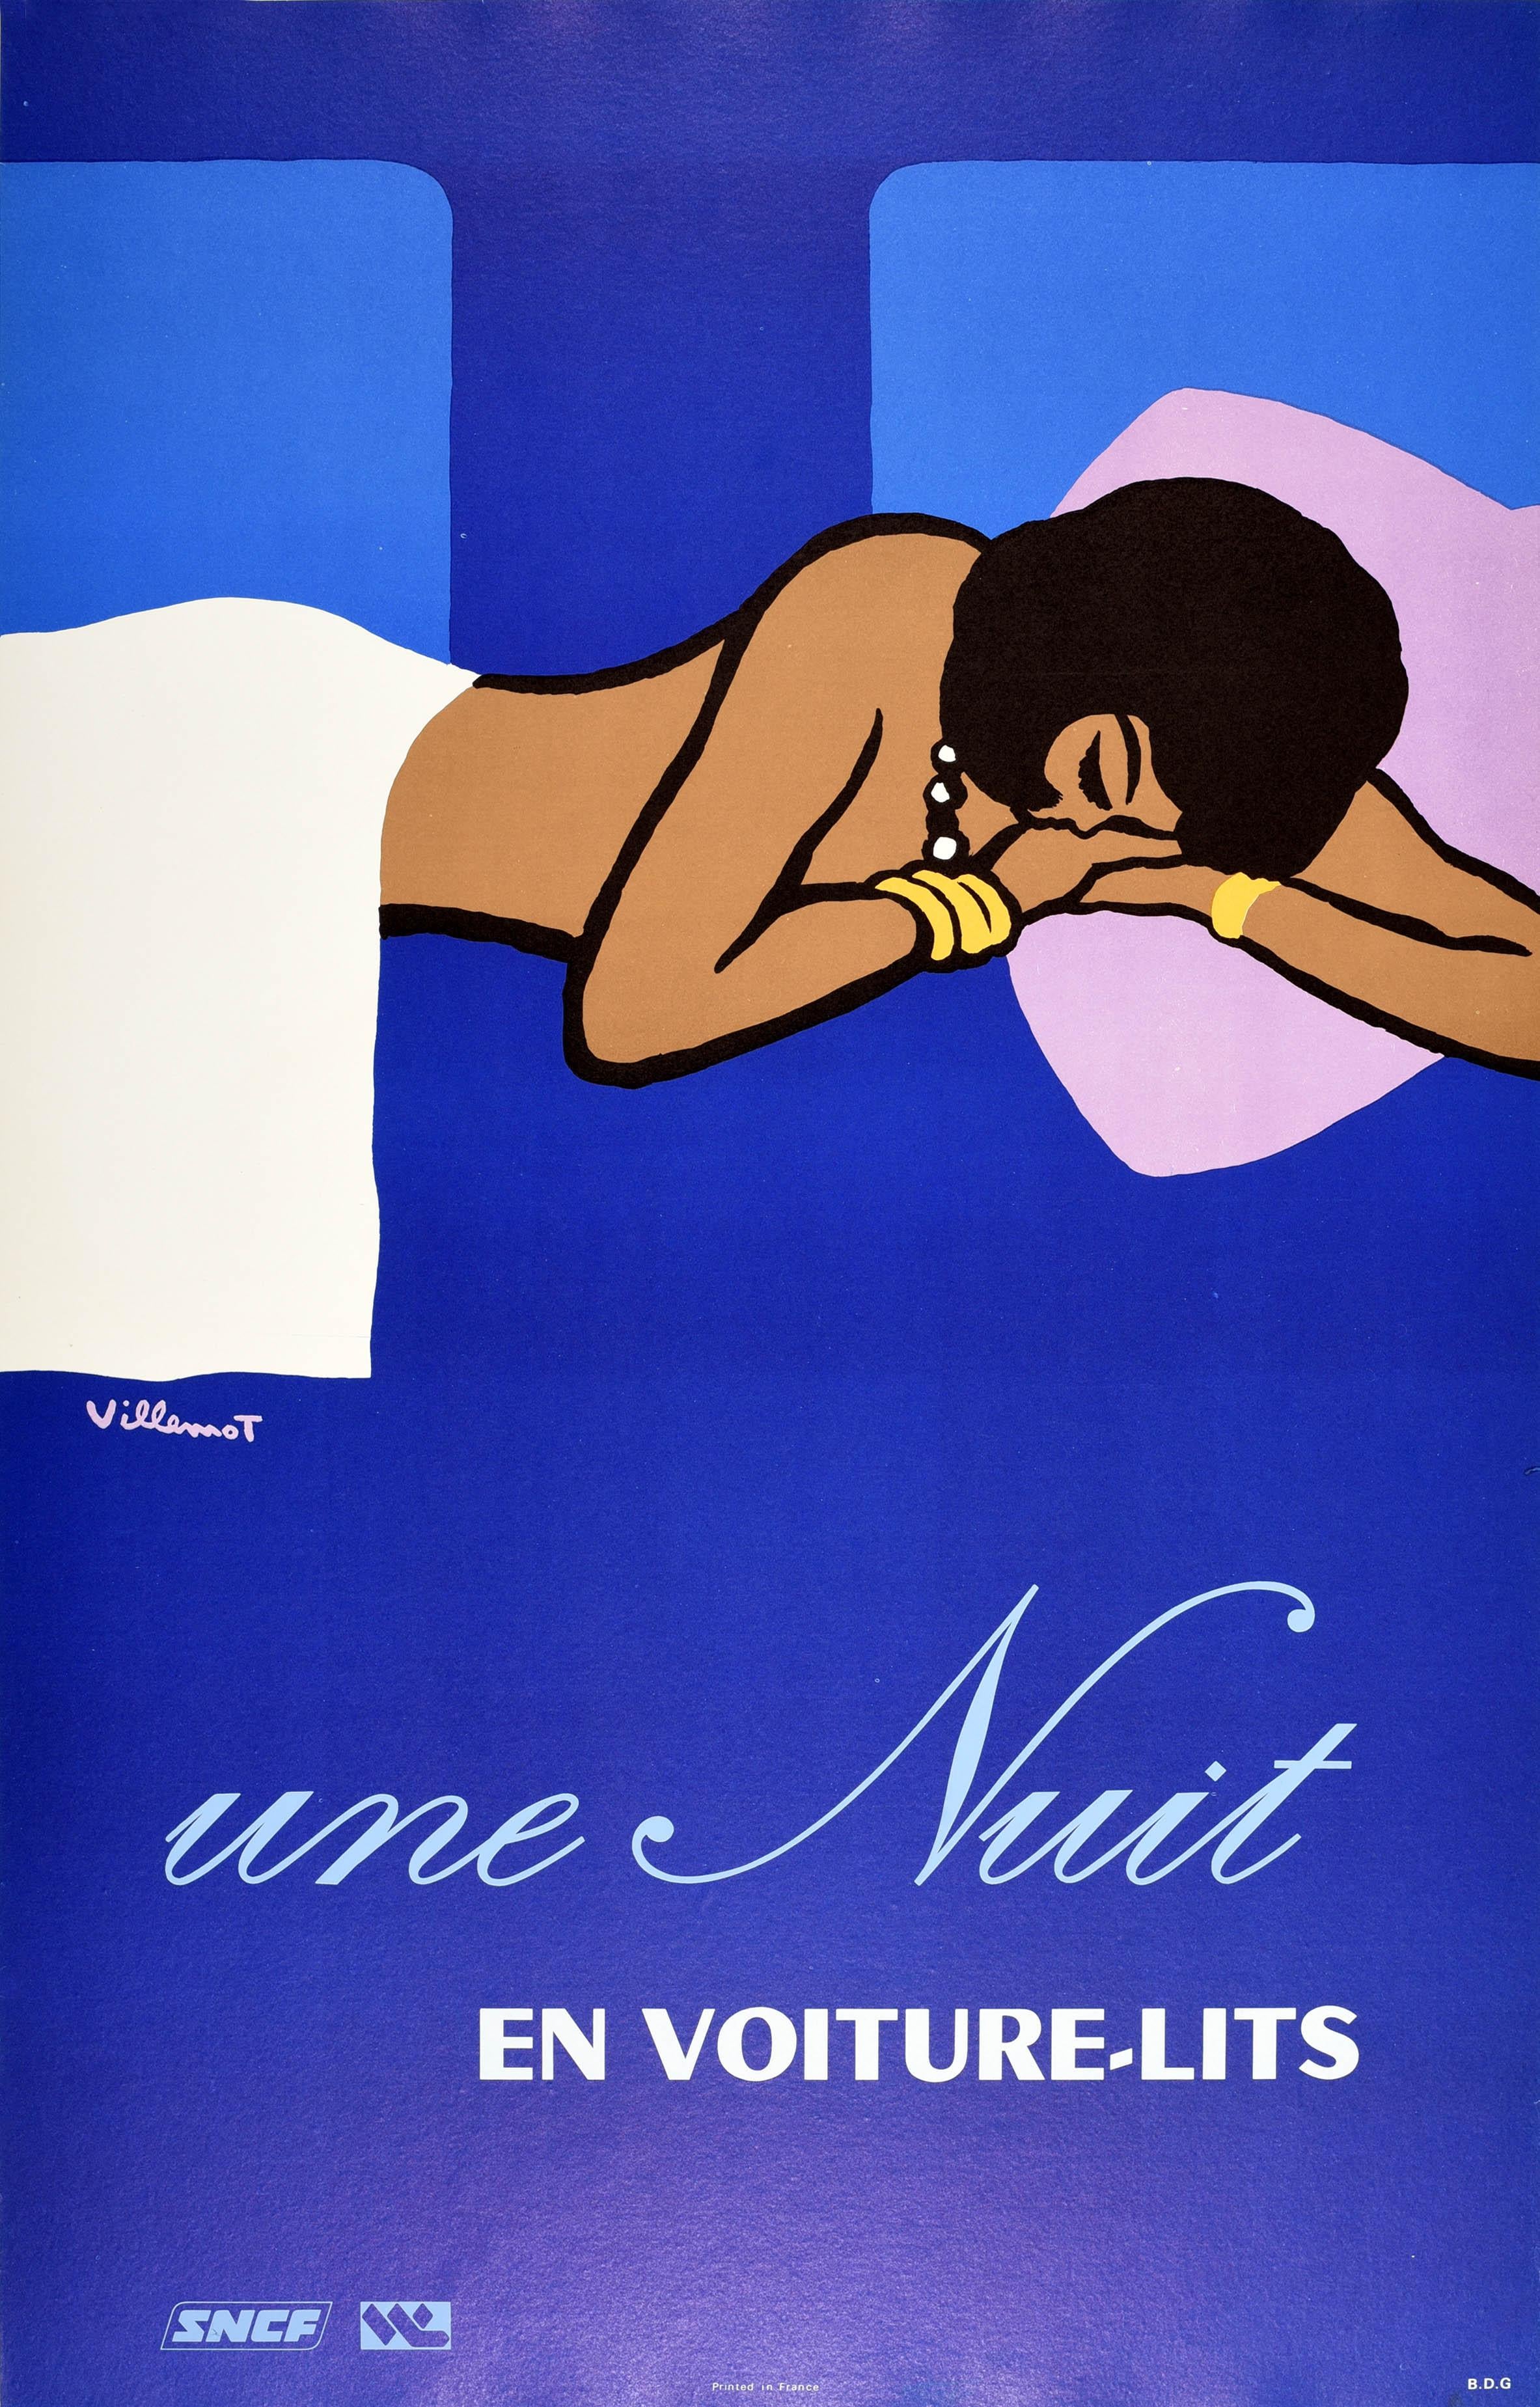 Original vintage travel advertising poster published by French Railways SNCF to promote the sleeping carriages available on its overnight services / Une nuit en voiture lits featuring a great design by the French graphic artist Bernard Villemot